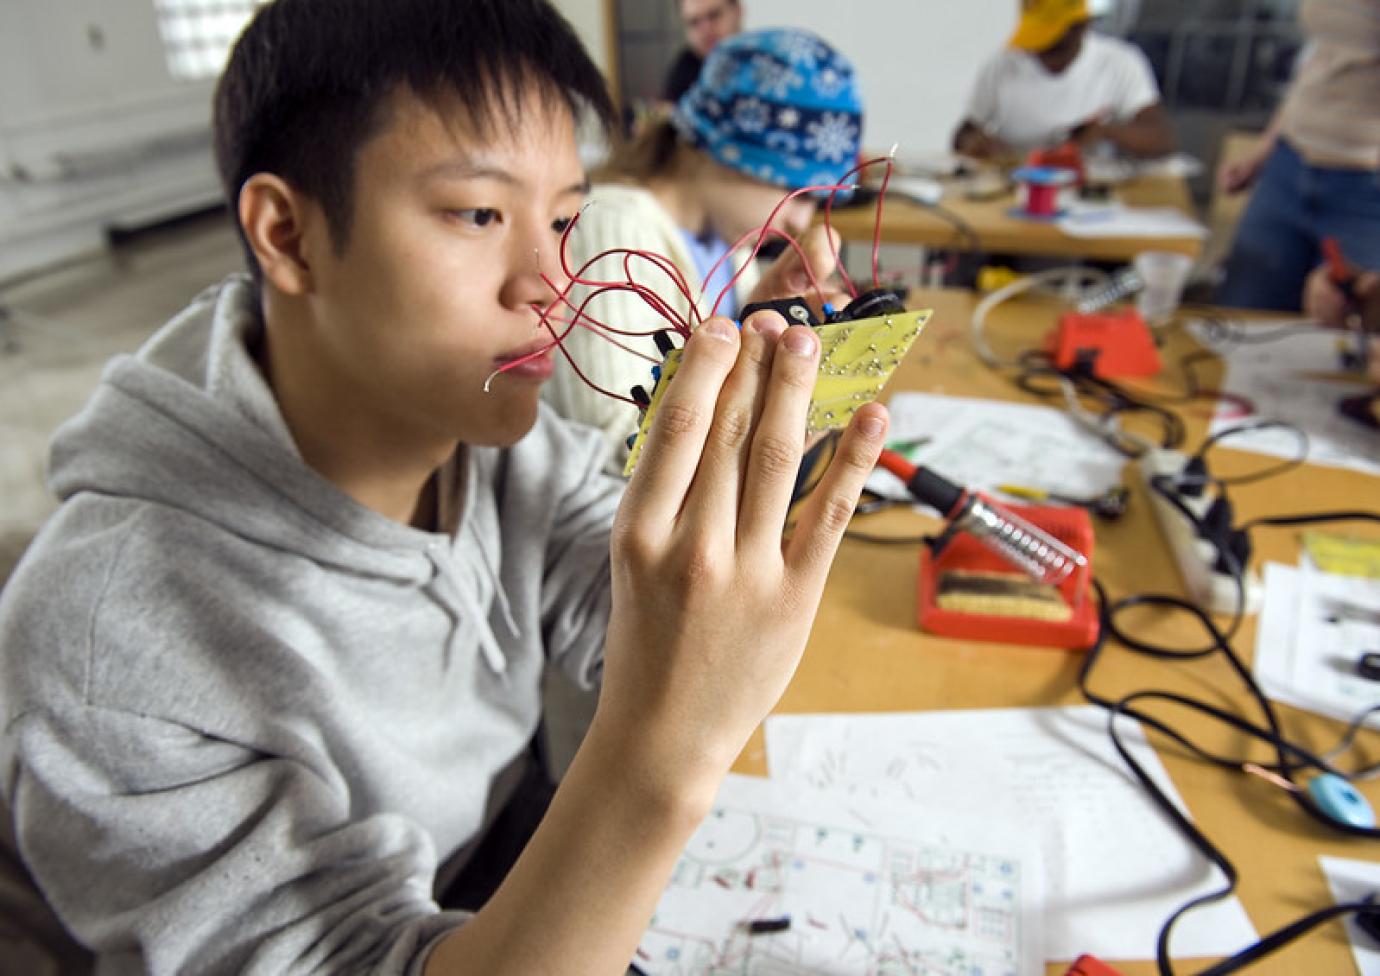 A student holds up a circuit board while other students work in the background.